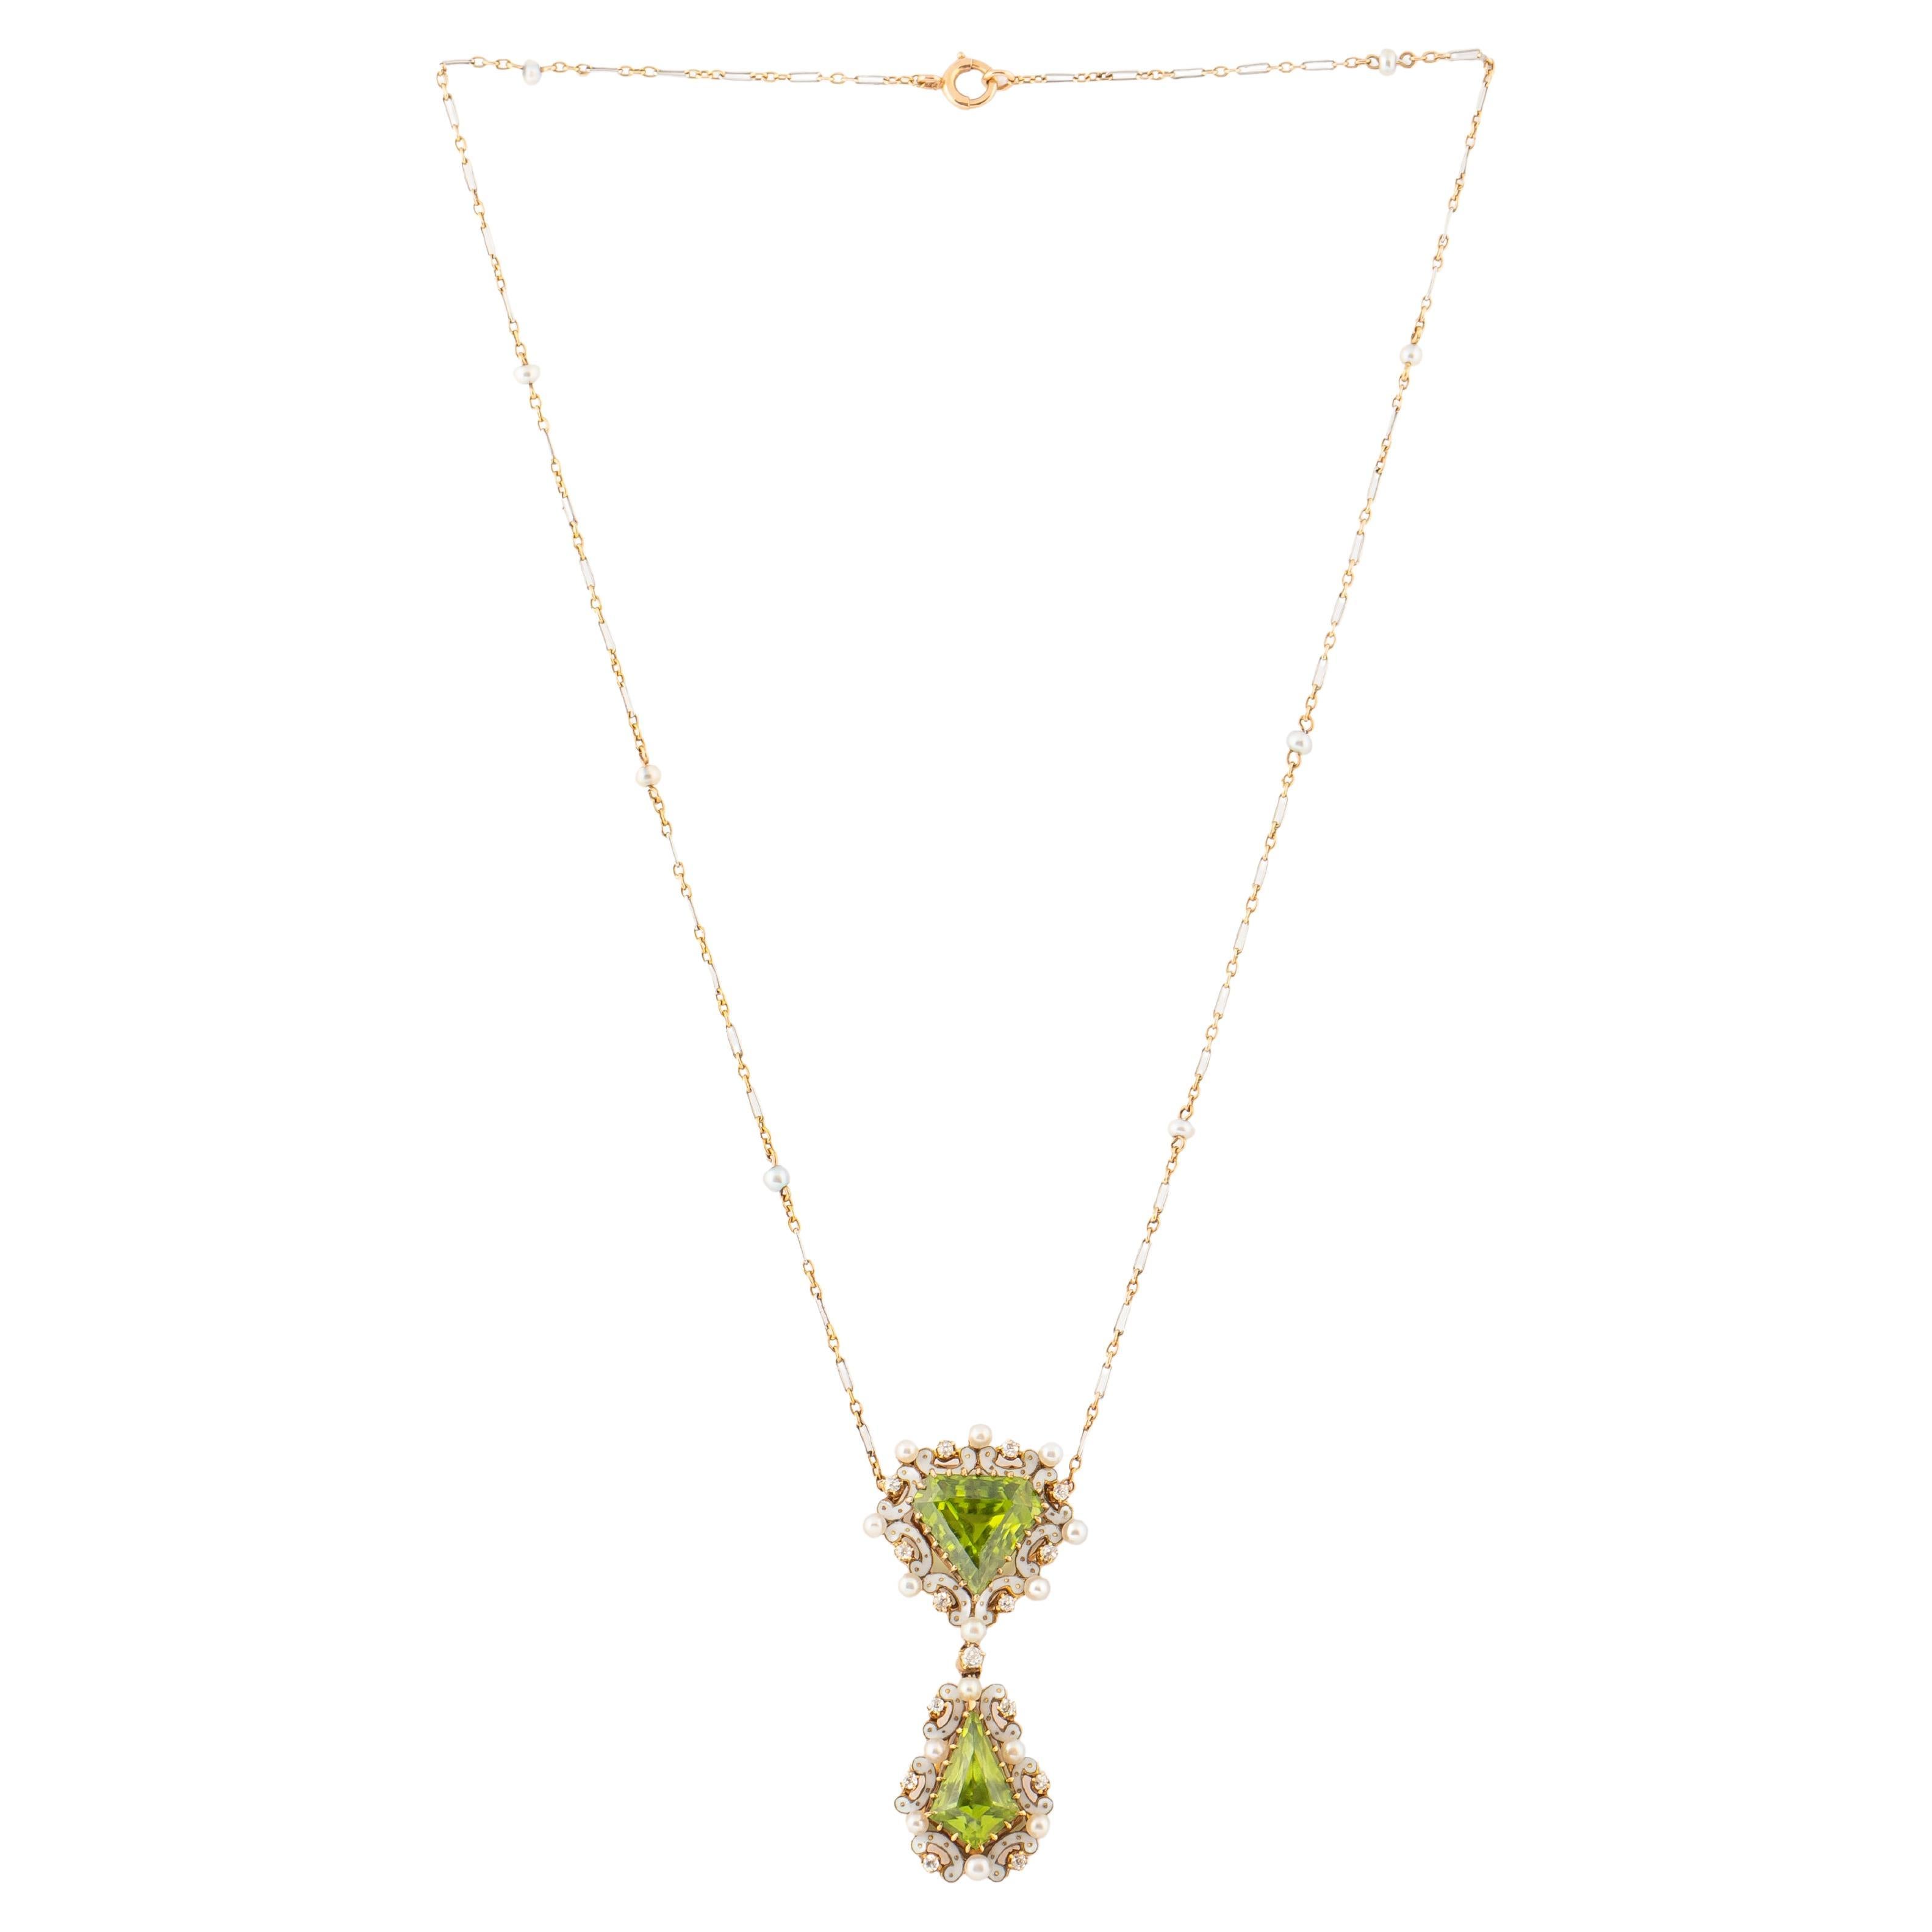 A beautiful English Edwardian Necklace, the center set with two kite-shaped-an innovative cut at that time- peridots of vibrant apple green color, each within white piqué enamel borders enhanced with lustrious natural seed pearls and bright diamond